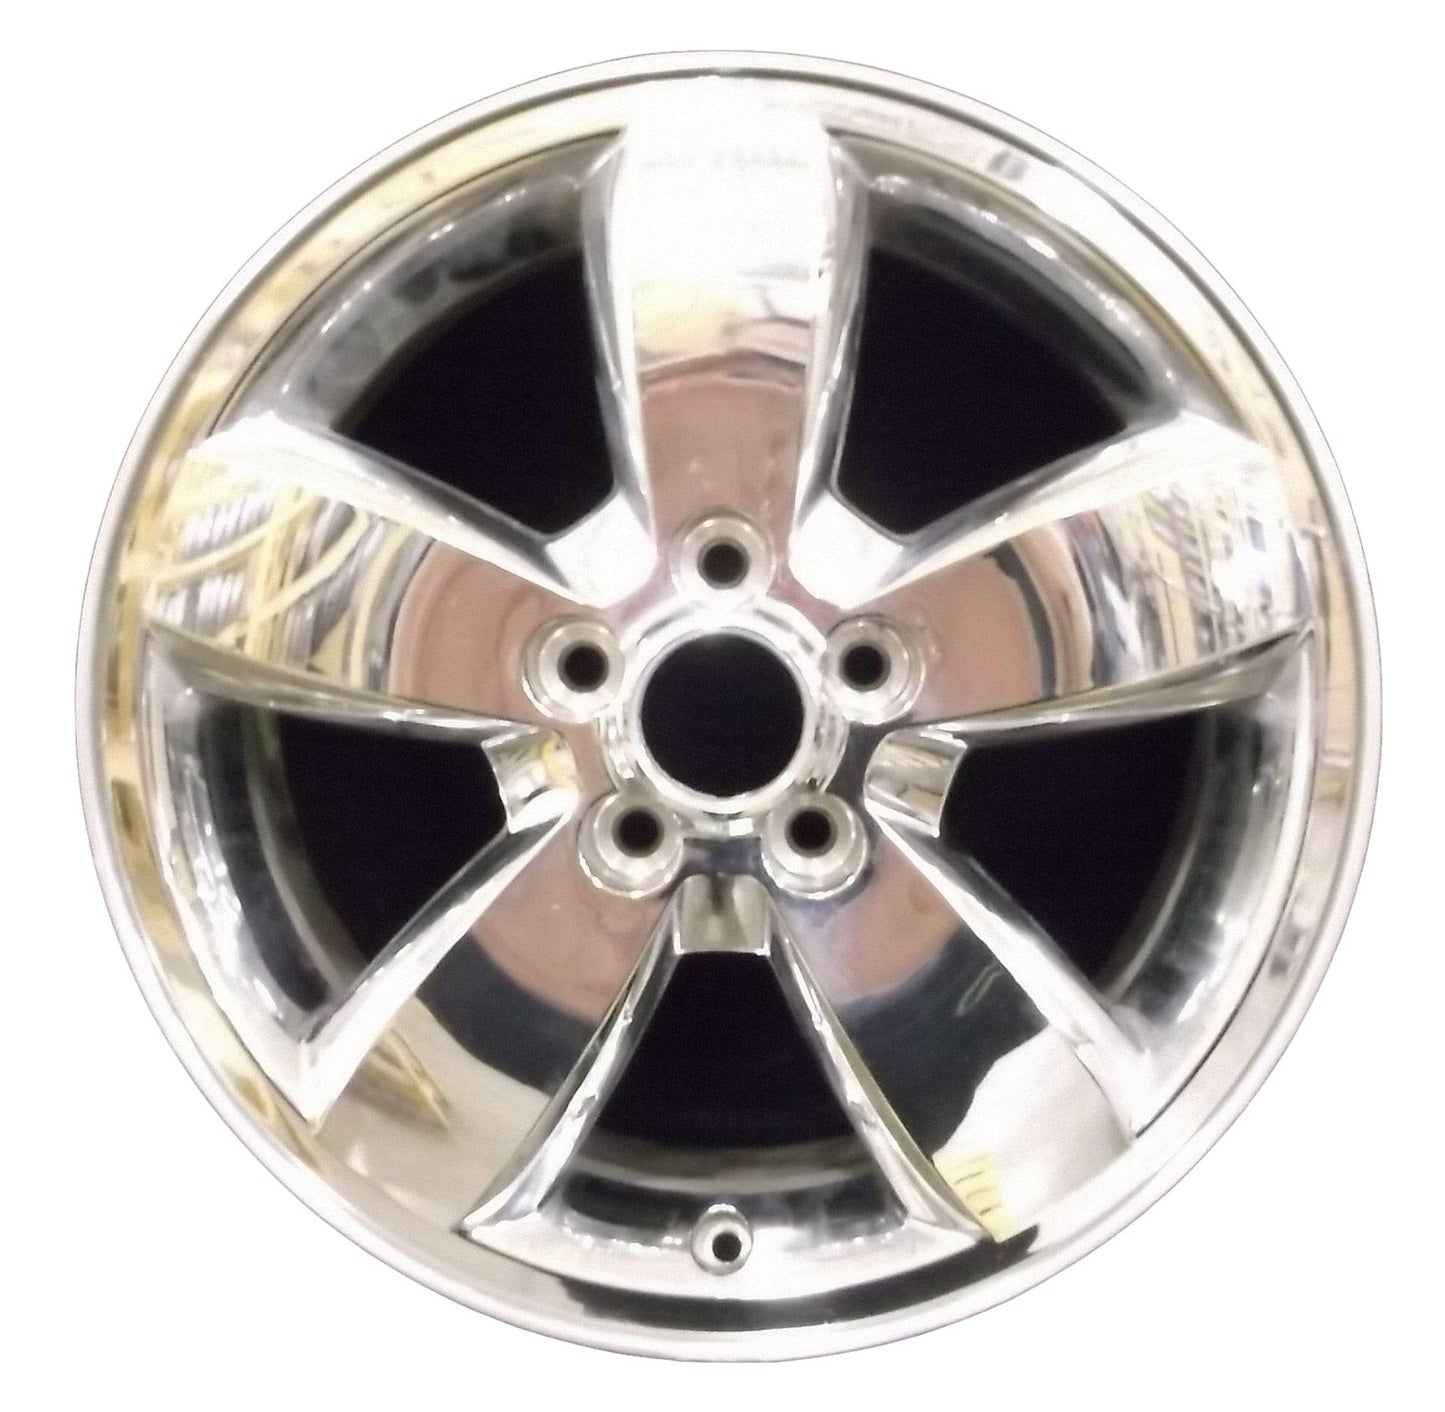 Ford Escape  2008, 2009, 2010, 2011, 2012 Factory OEM Car Wheel Size 17x7 Alloy WAO.3680.FULL.CHRC